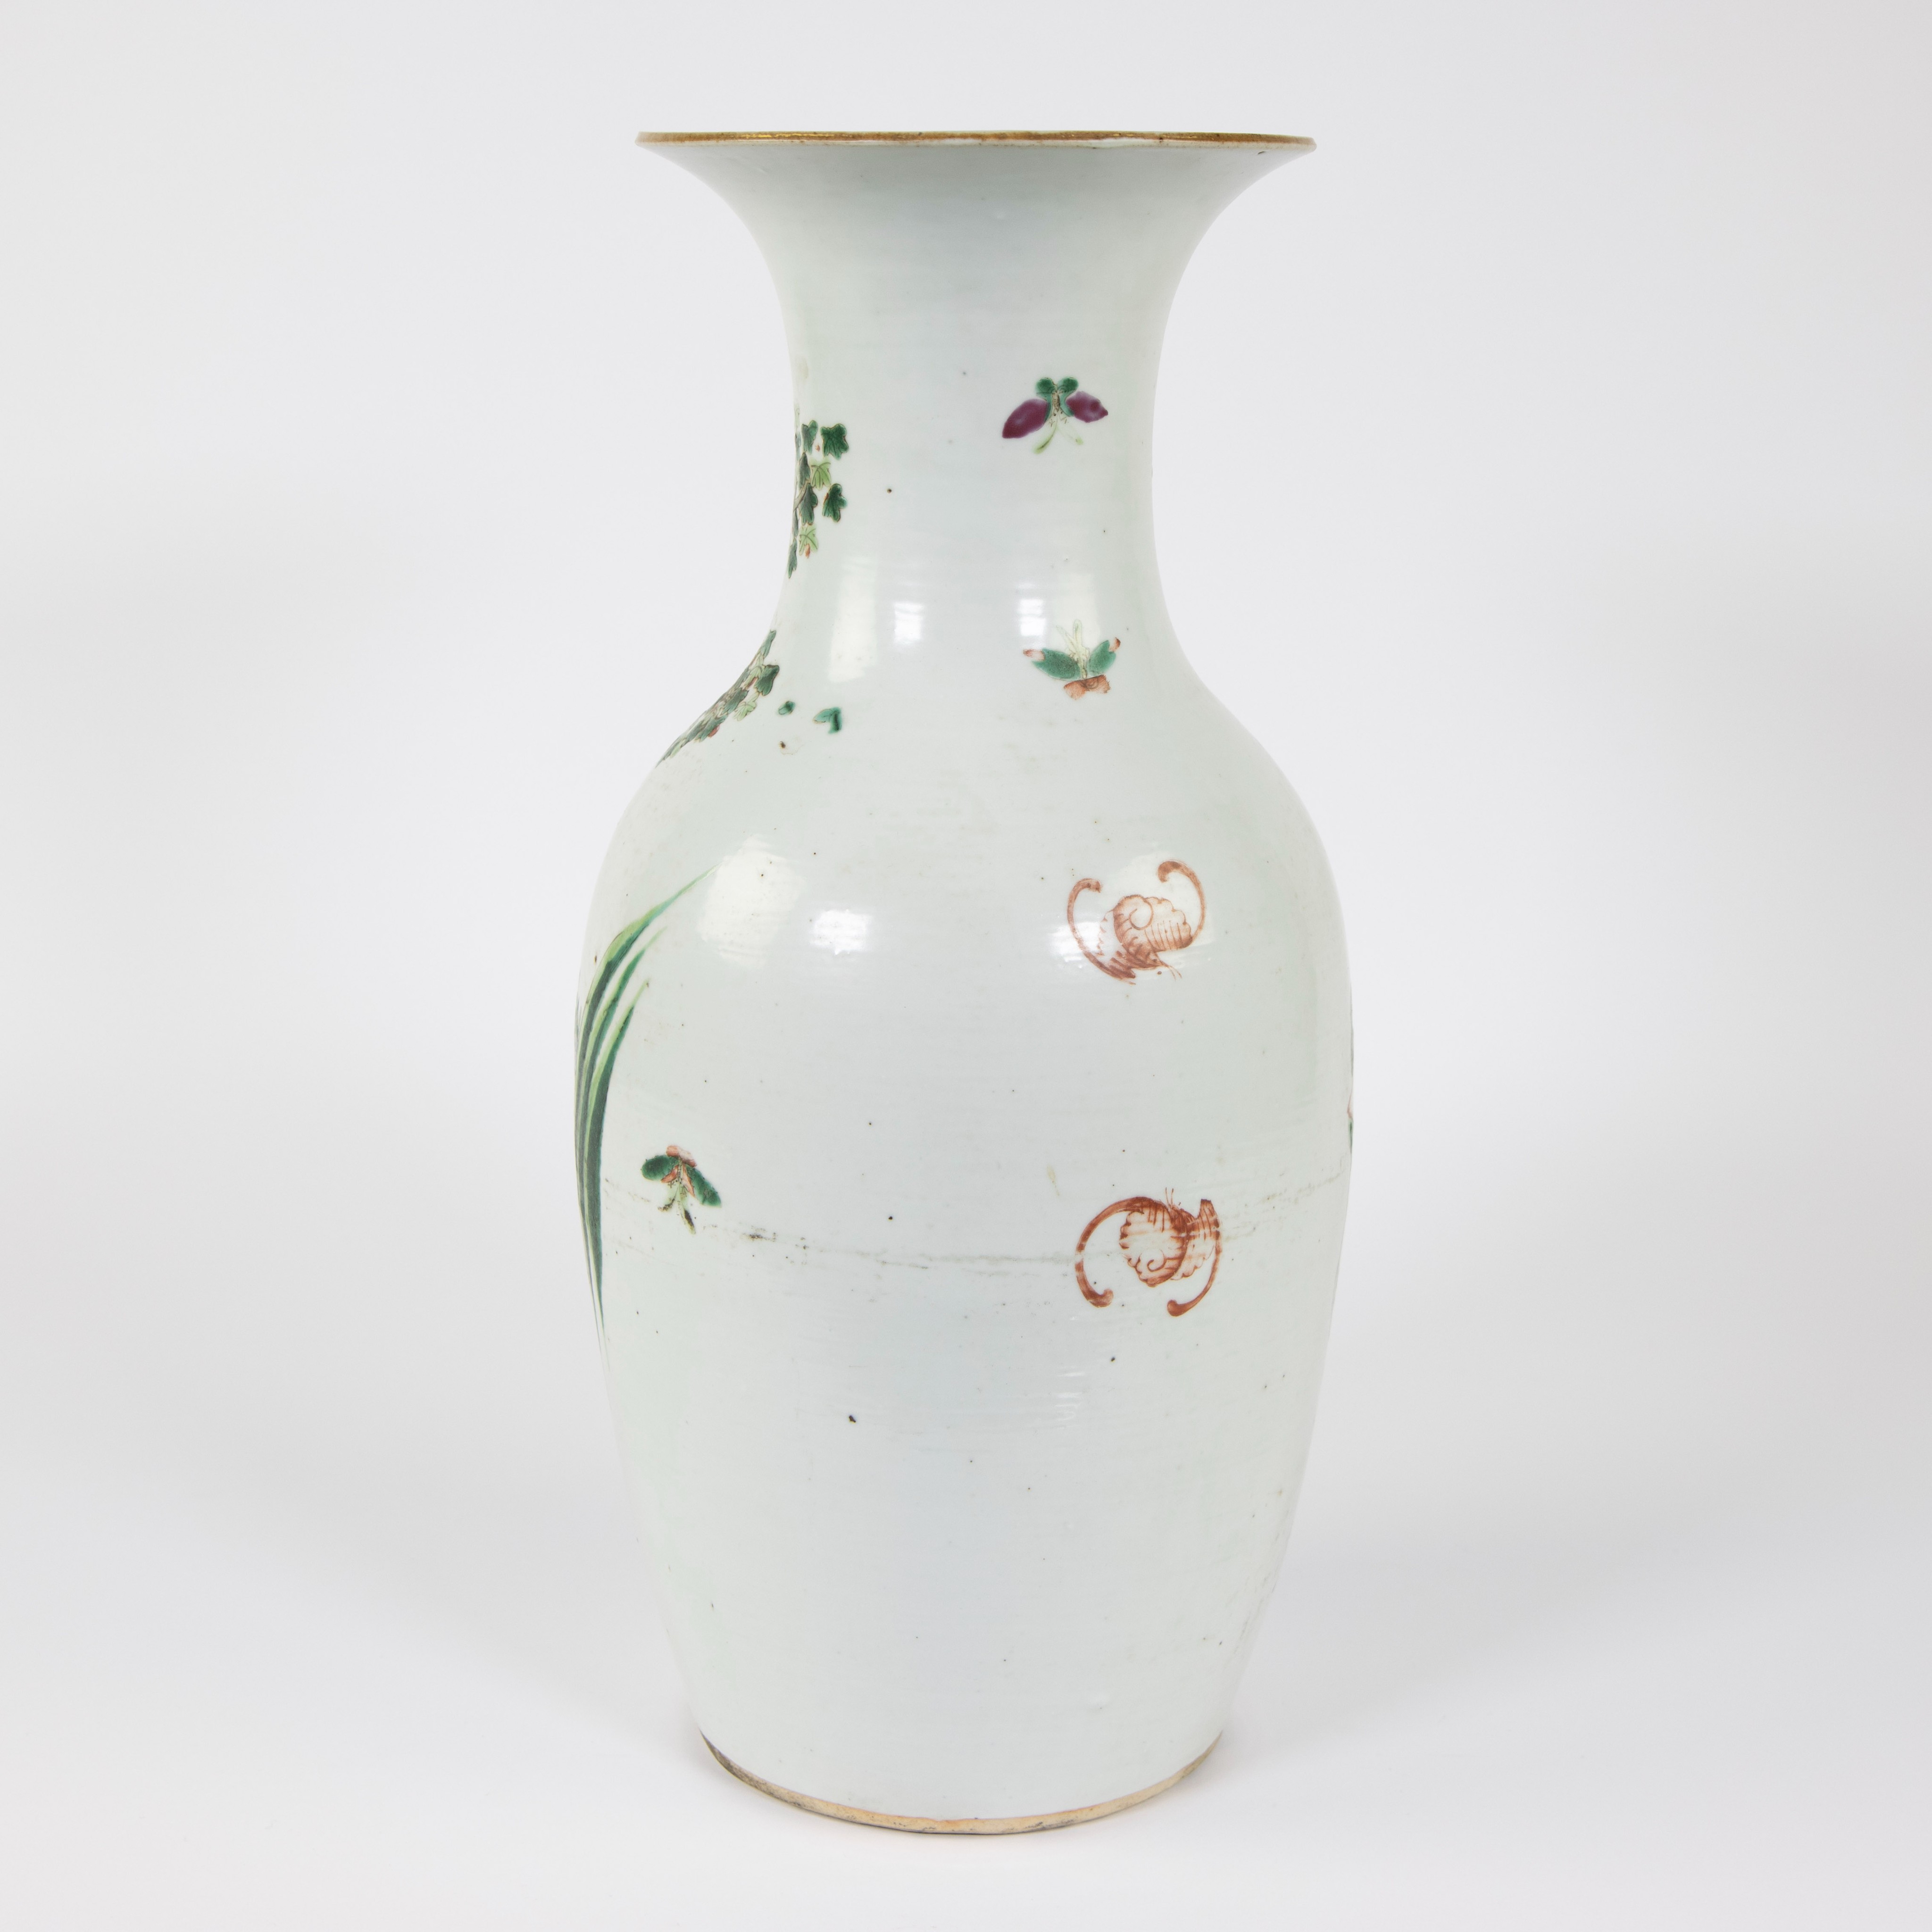 Chinese vase with garden decoration and butterflies, 19th century - Image 3 of 7